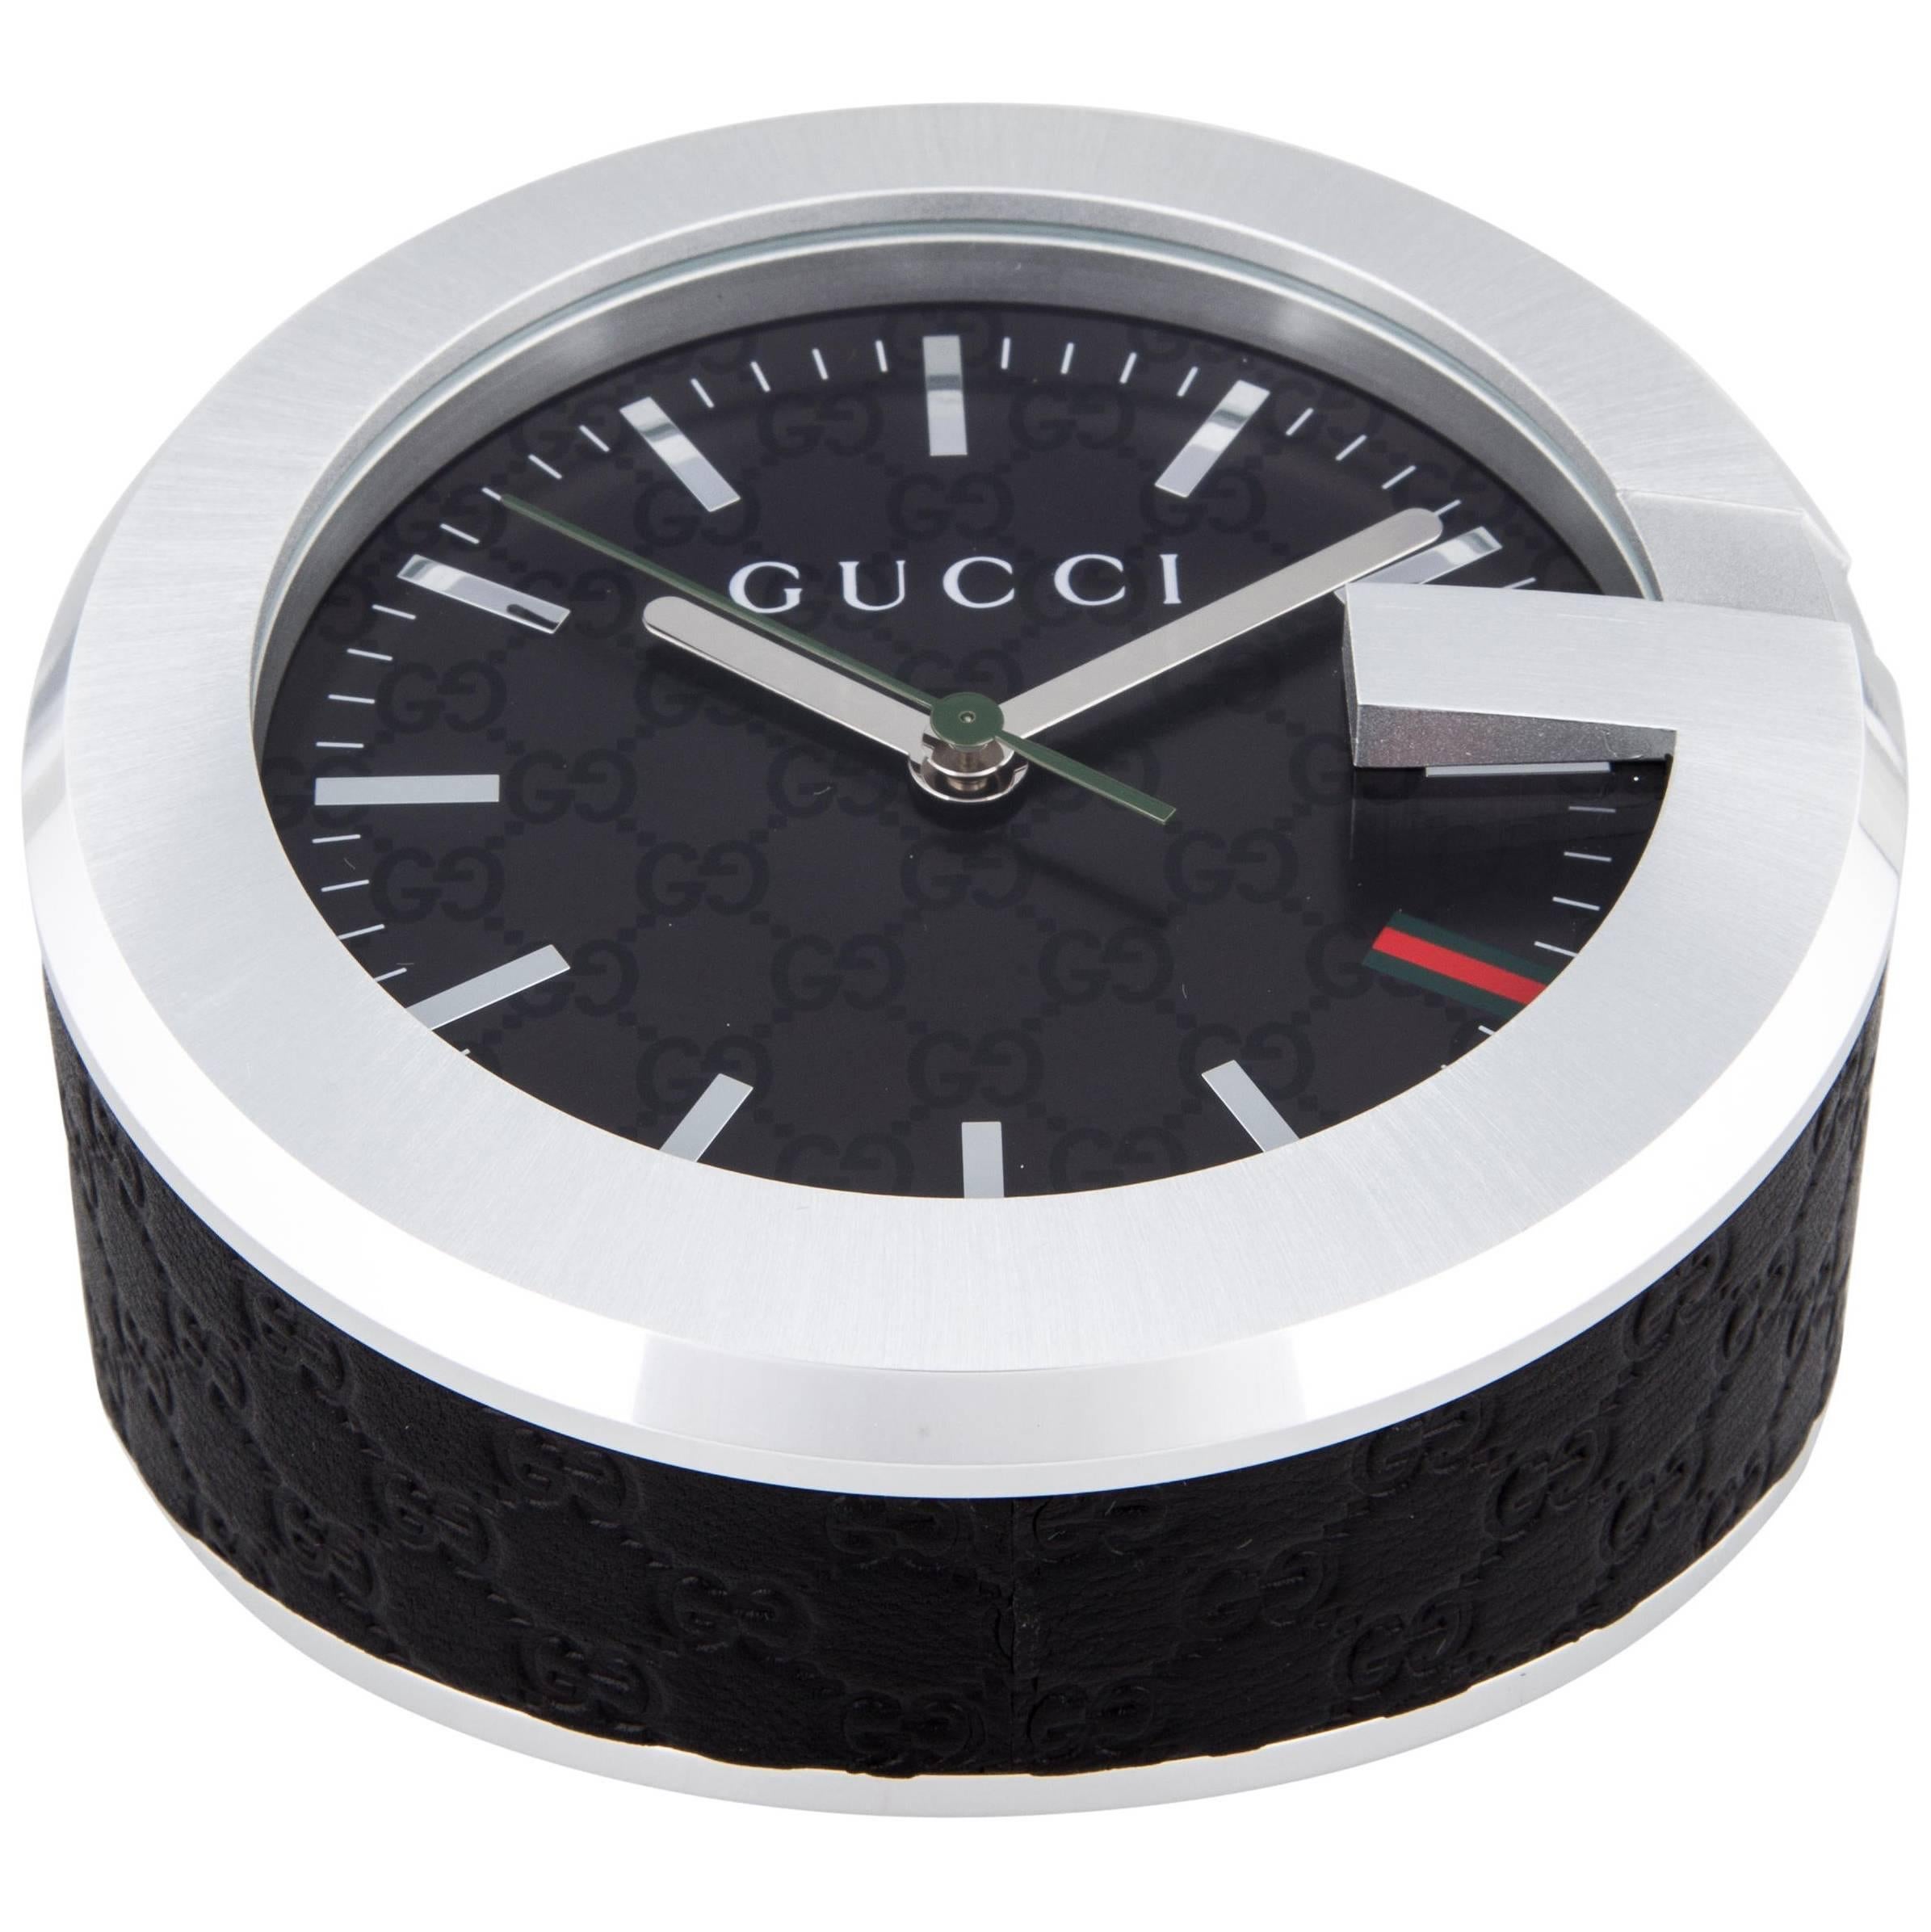 Gucci New Men's Black Leather Stainless Steel Table Desk Clock in Box